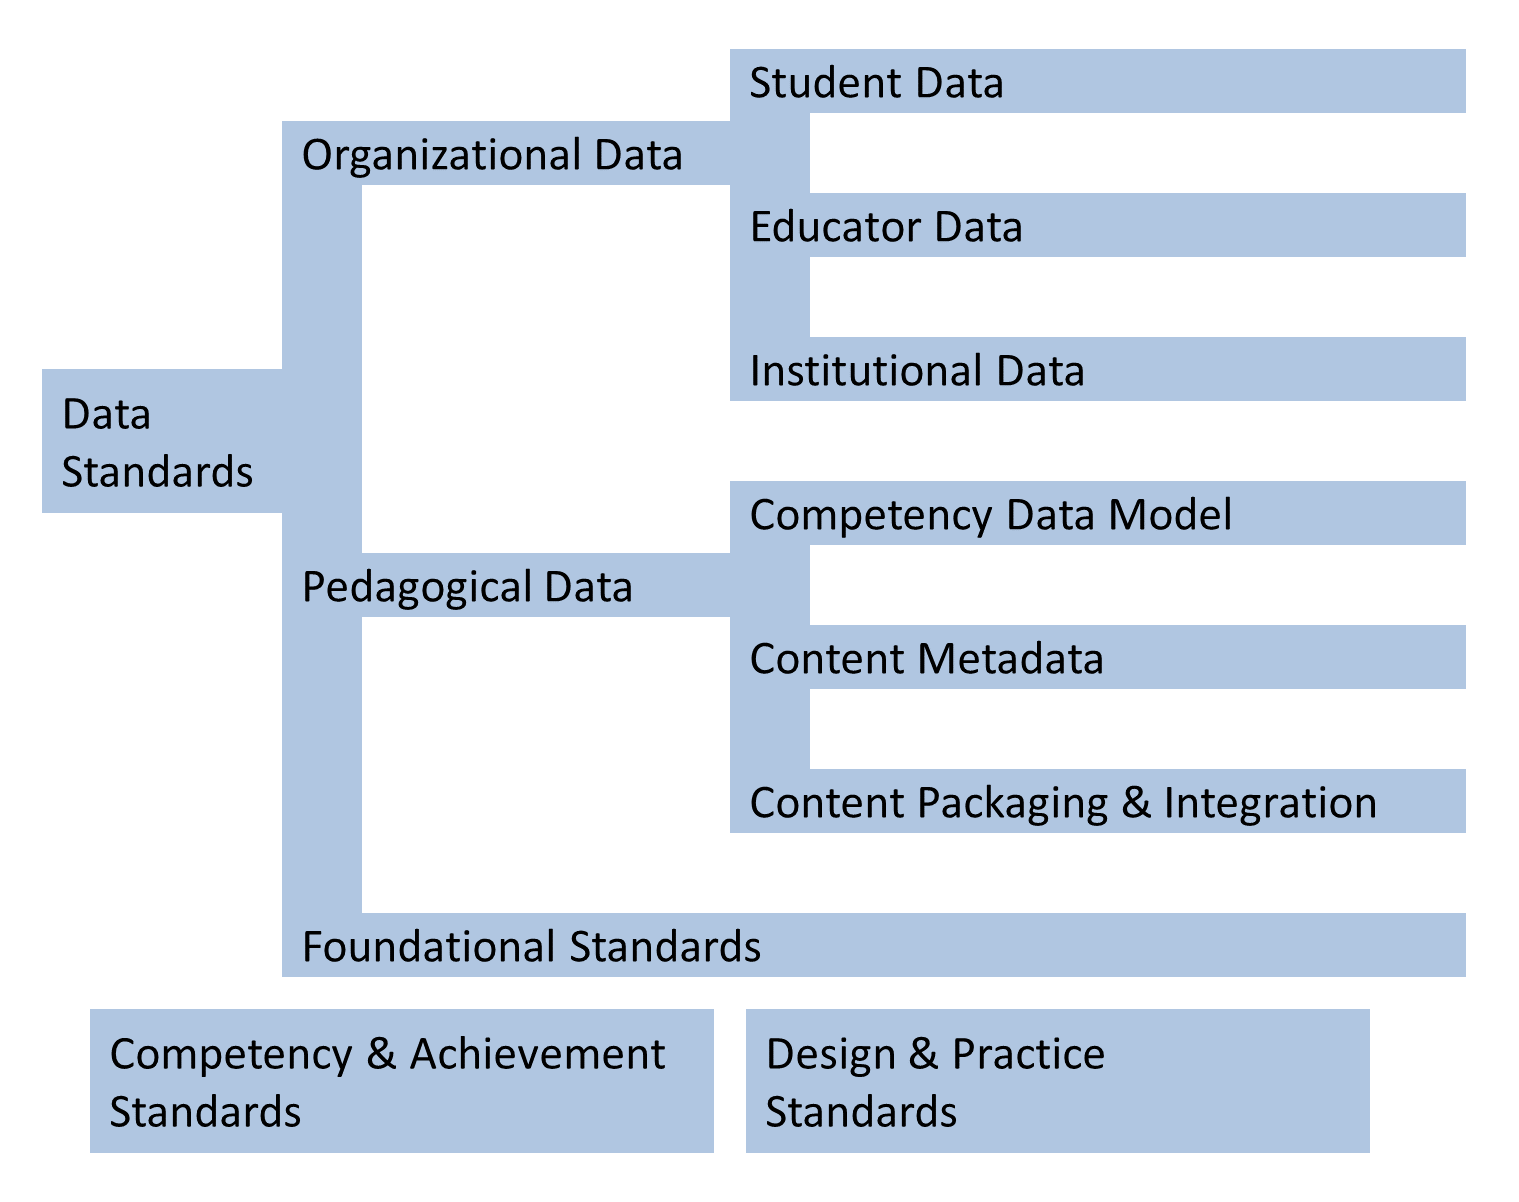 A hierarchy of learning standards matching the descriptions in the text.